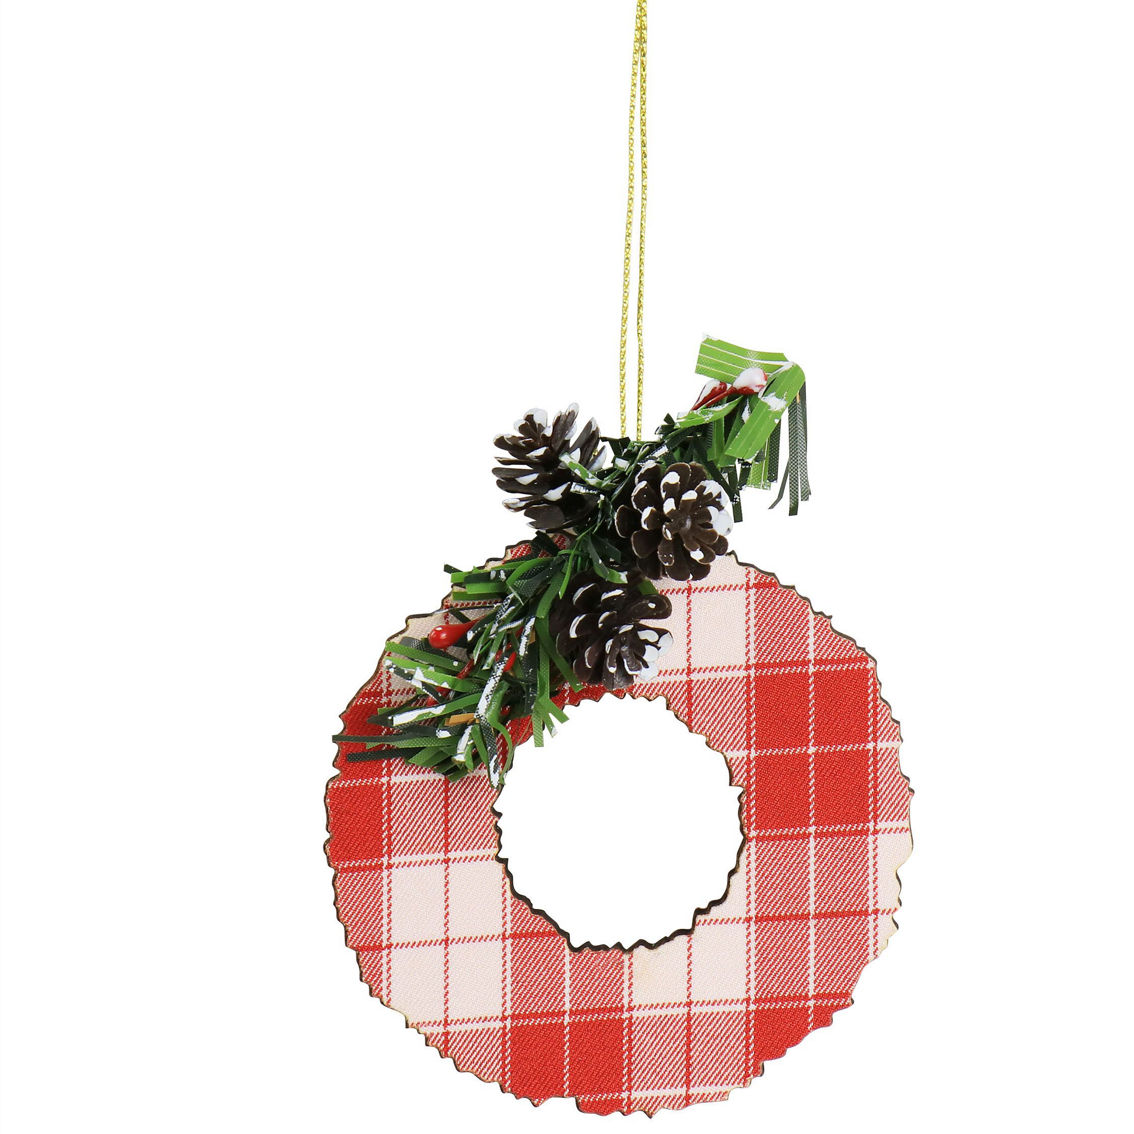 Martha Stewart Holiday Wreath Ornament 4 Piece Set in Red and Green - Image 2 of 5